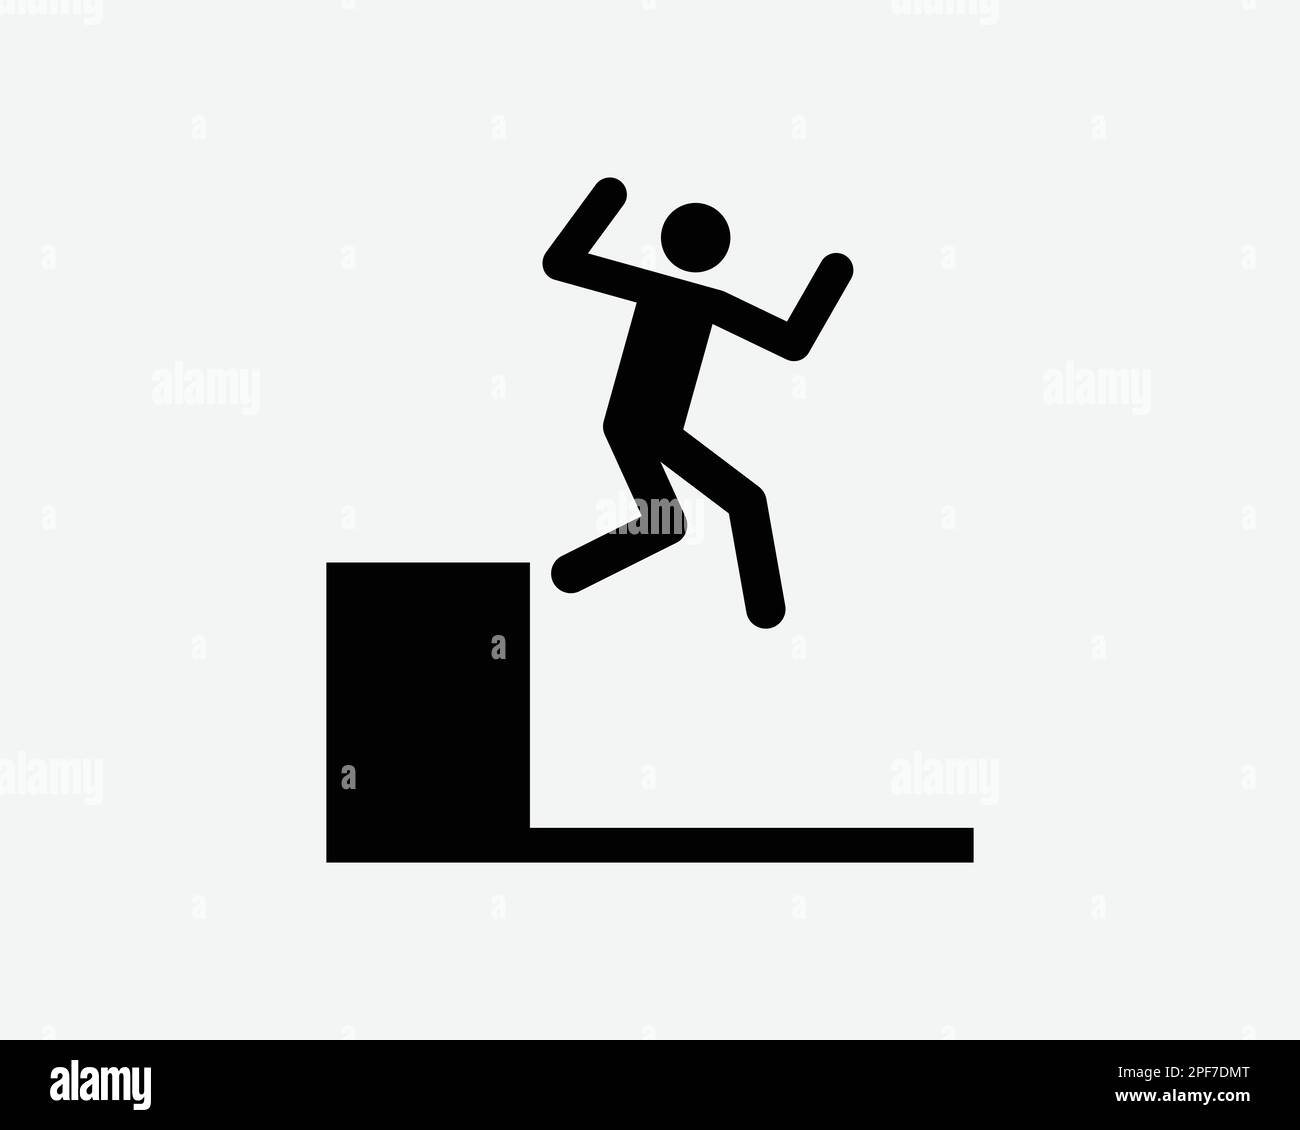 Jumping Down Icon Man Jump Leap Fall Cliff High Ground Suicide Vector Black White Silhouette Symbol Sign Graphic Clipart Artwork Illustration Pictogra Stock Vector